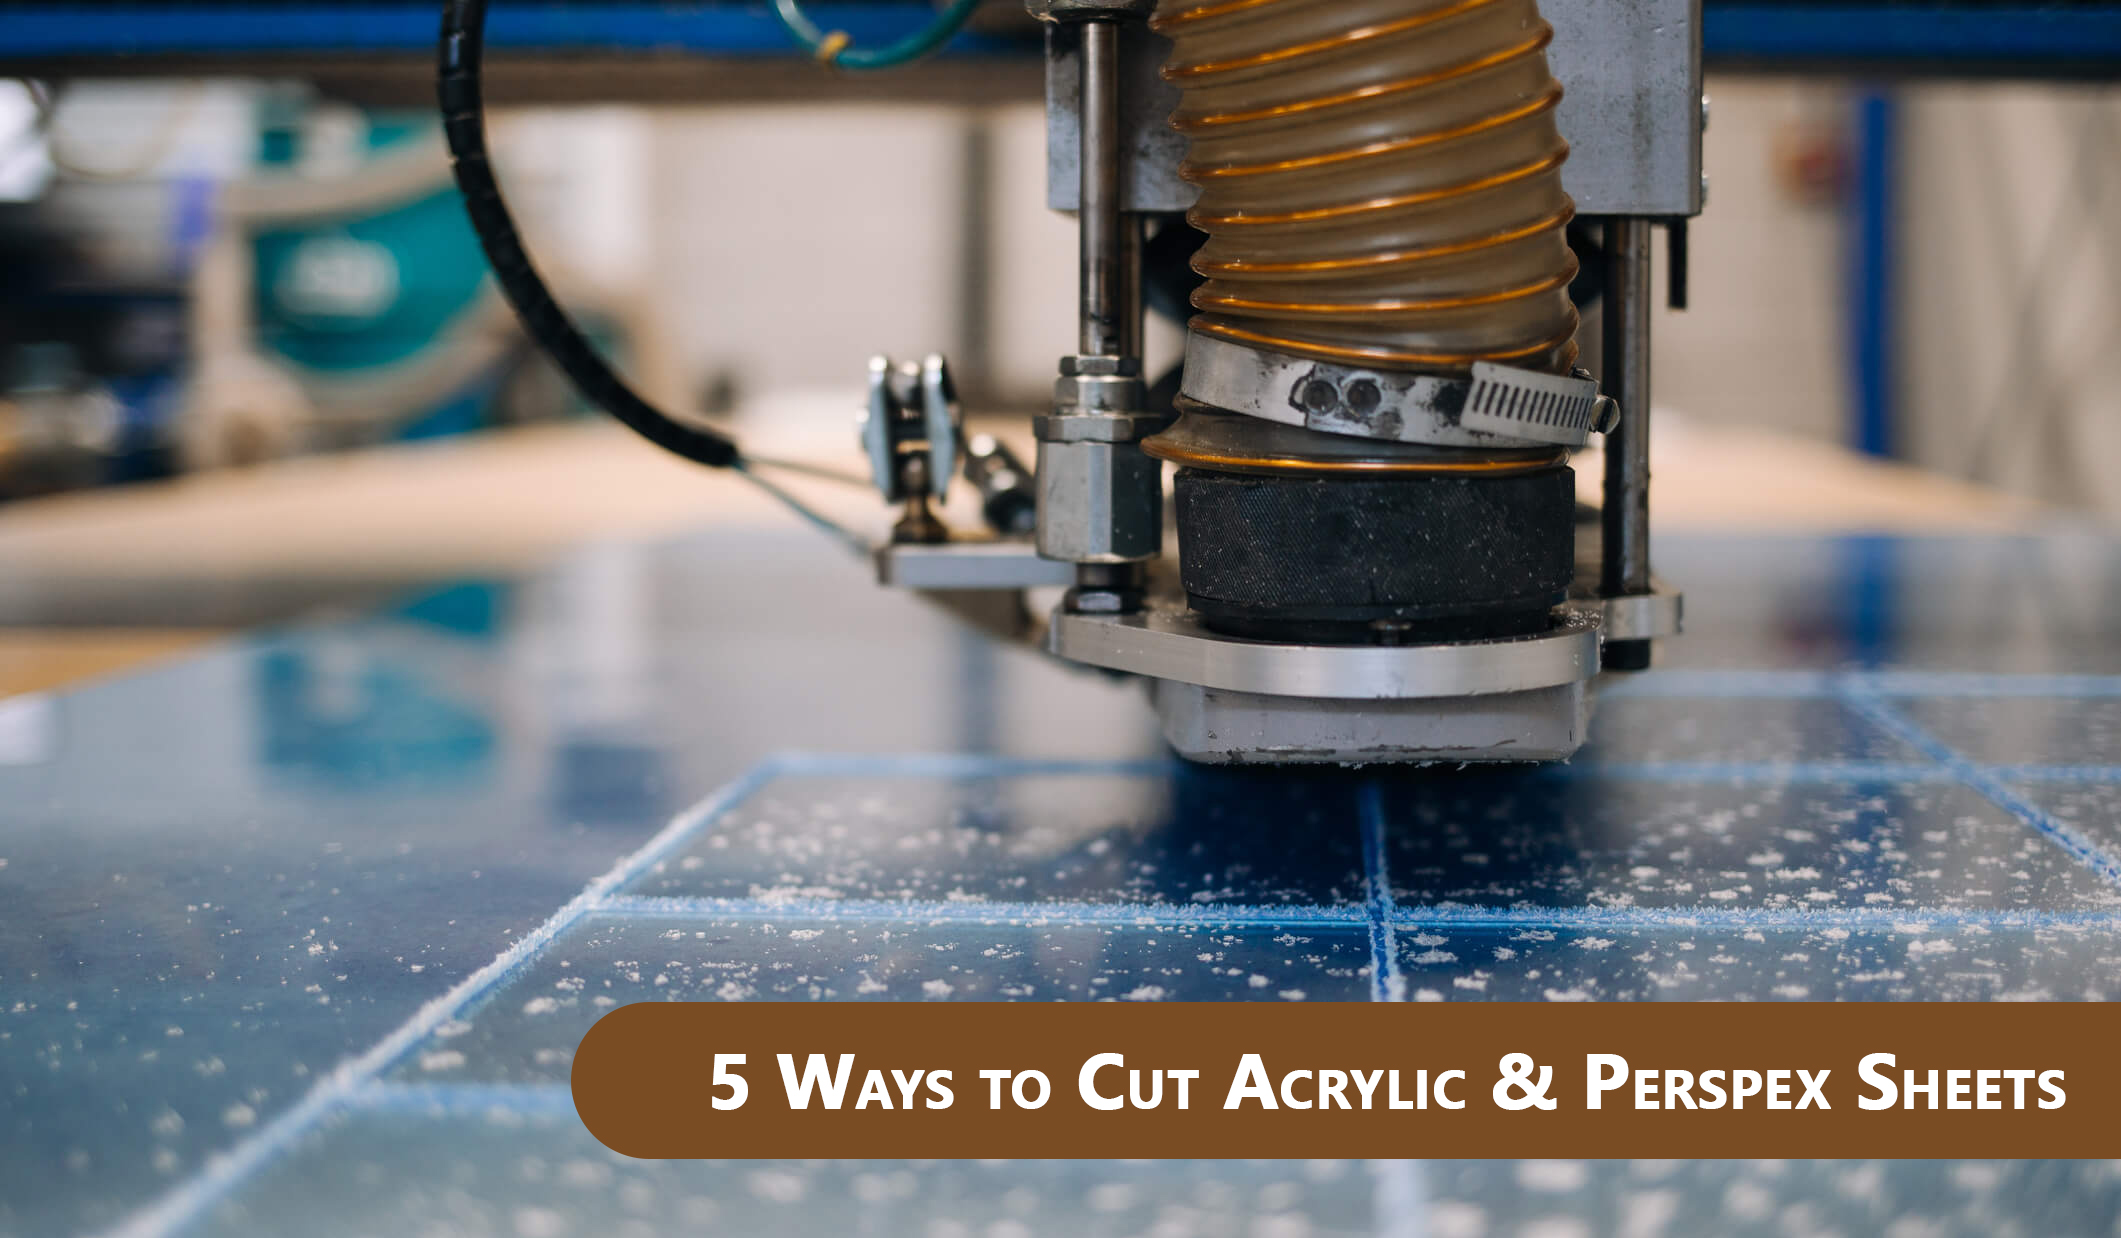 5 Ways to Cut Acrylic & Perspex Sheets